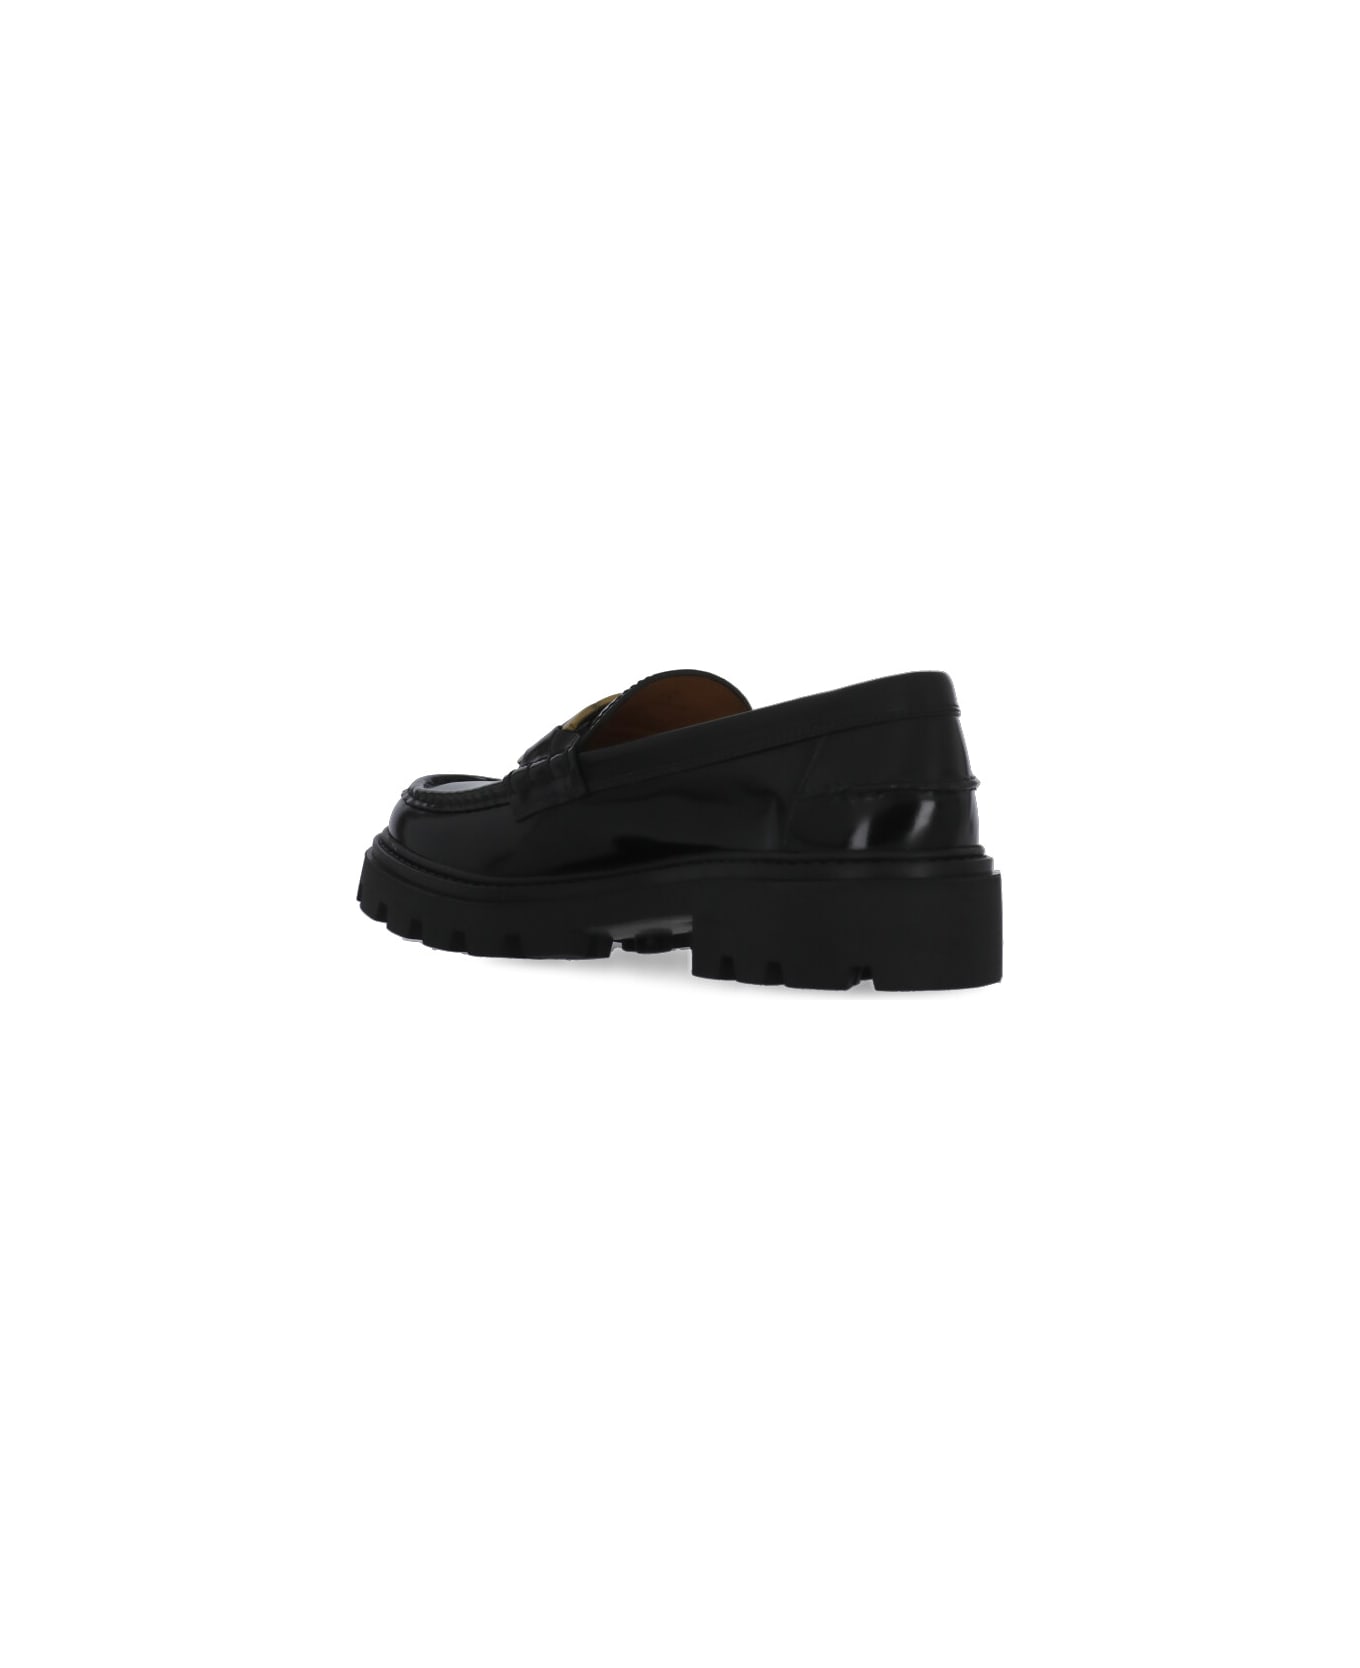 Tod's Kate Loafers - Black ハイヒール